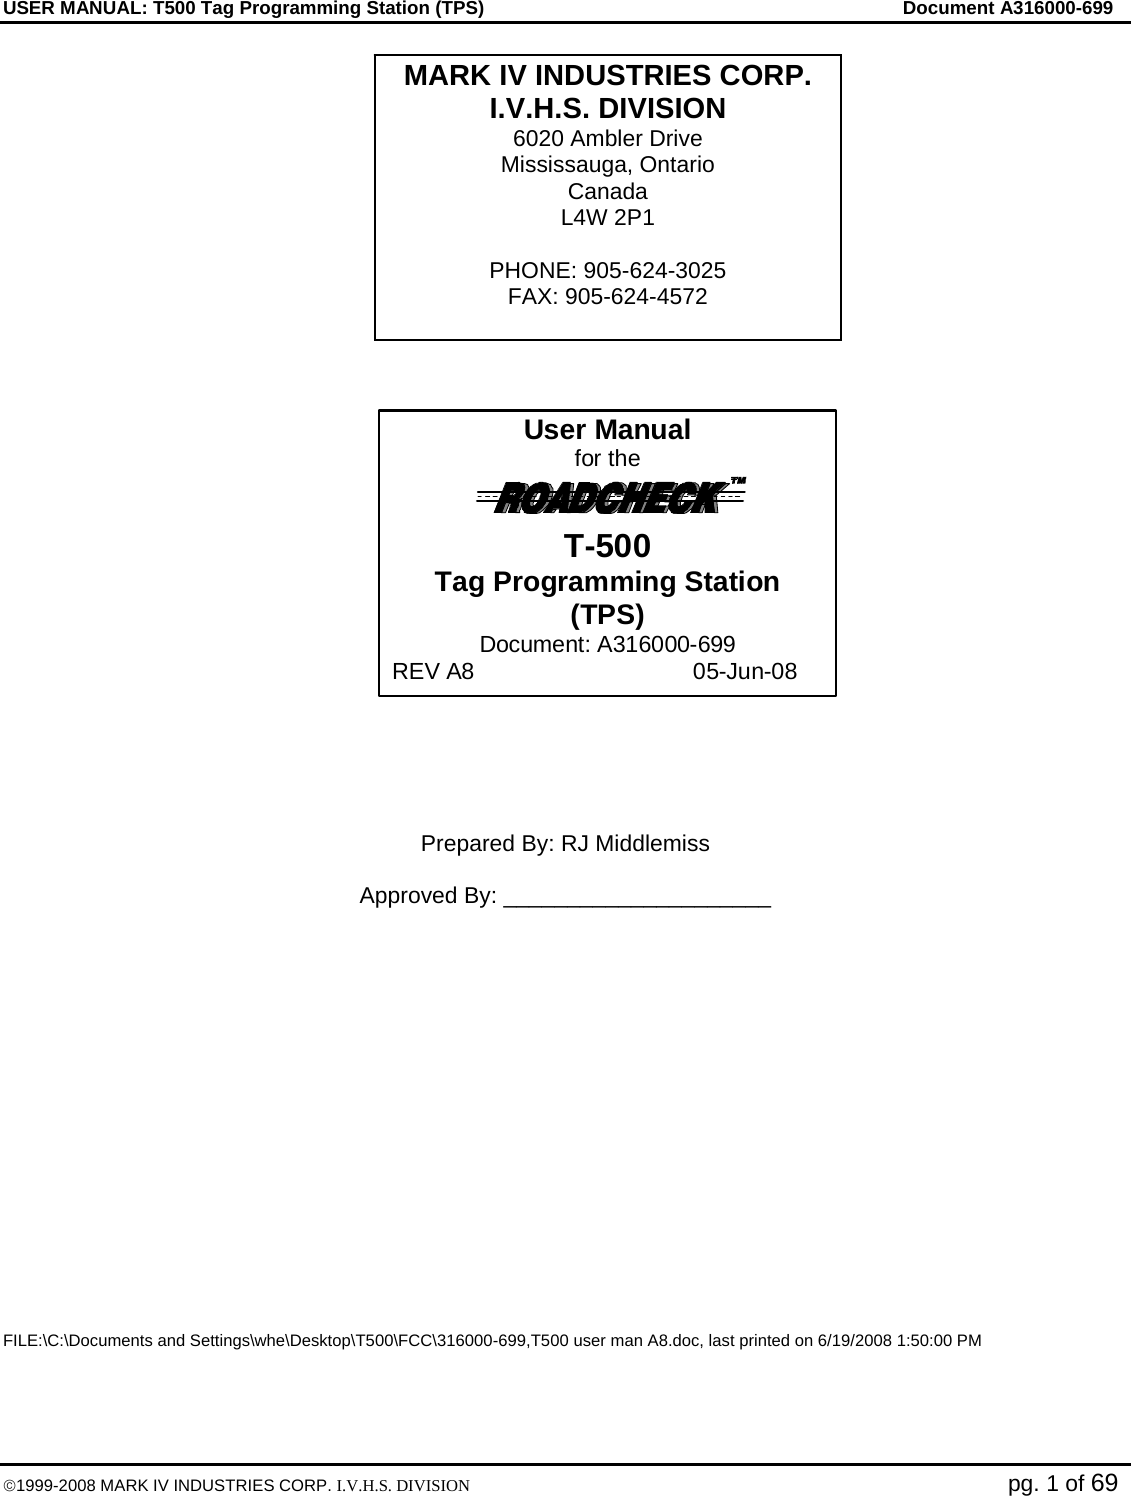 USER MANUAL: T500 Tag Programming Station (TPS)     Document A316000-699  ©1999-2008 MARK IV INDUSTRIES CORP. I.V.H.S. DIVISION   pg. 1 of 69                   Prepared By: RJ Middlemiss  Approved By: _____________________                 FILE:\C:\Documents and Settings\whe\Desktop\T500\FCC\316000-699,T500 user man A8.doc, last printed on 6/19/2008 1:50:00 PM  MARK IV INDUSTRIES CORP. I.V.H.S. DIVISION 6020 Ambler Drive Mississauga, Ontario Canada L4W 2P1  PHONE: 905-624-3025 FAX: 905-624-4572  User Manual for the   T-500 Tag Programming Station (TPS) Document: A316000-699 REV A8  05-Jun-08 